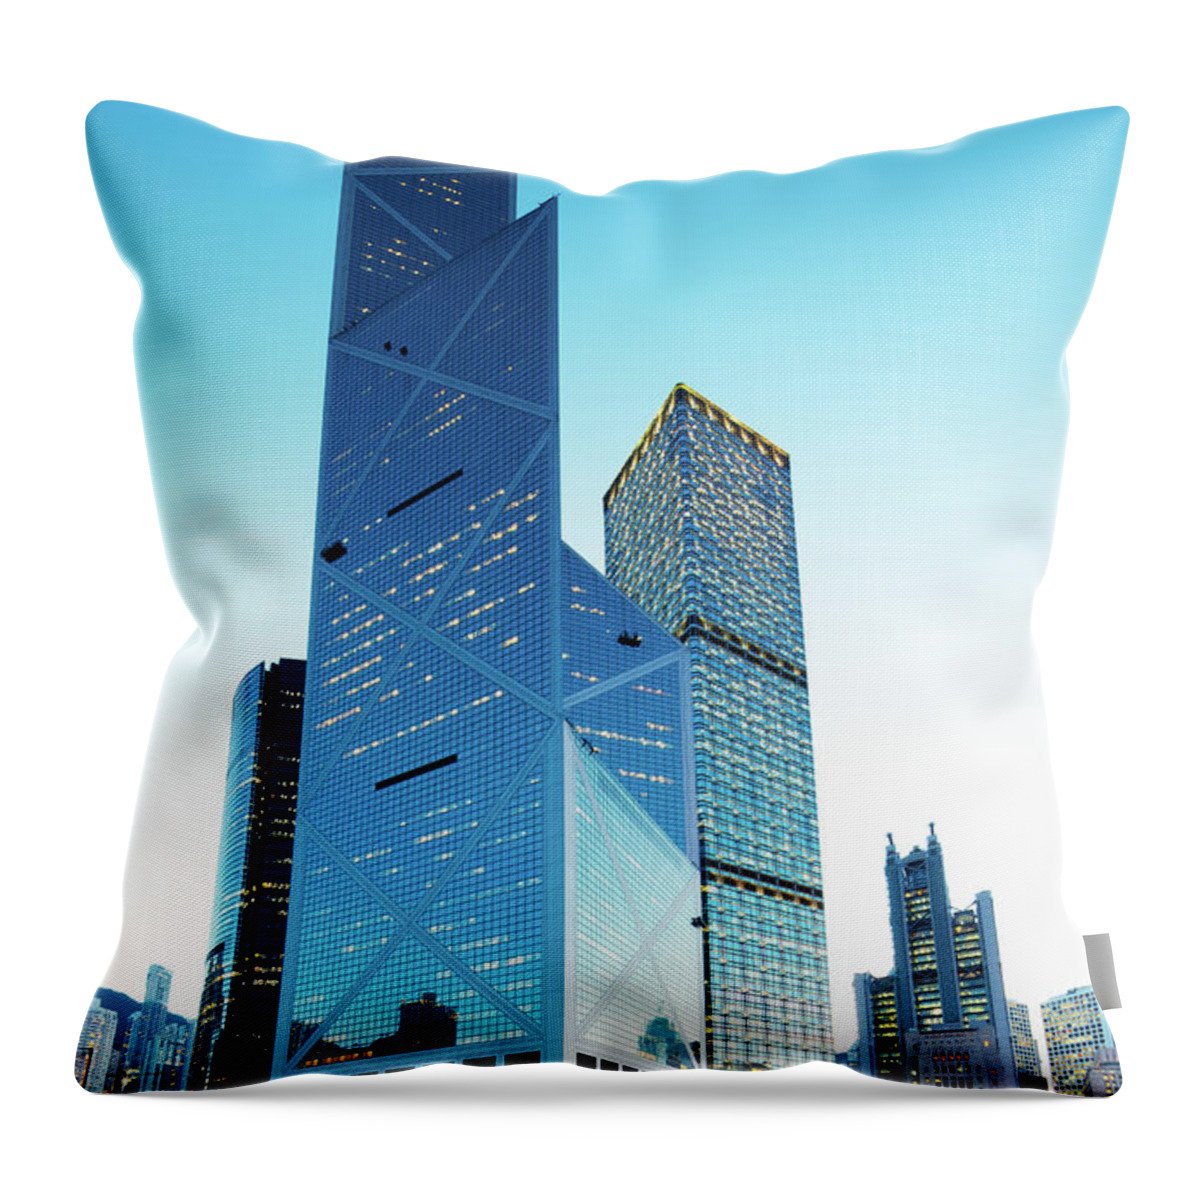 Chinese Culture Throw Pillow featuring the photograph Hong Kong High Rise by Tomml